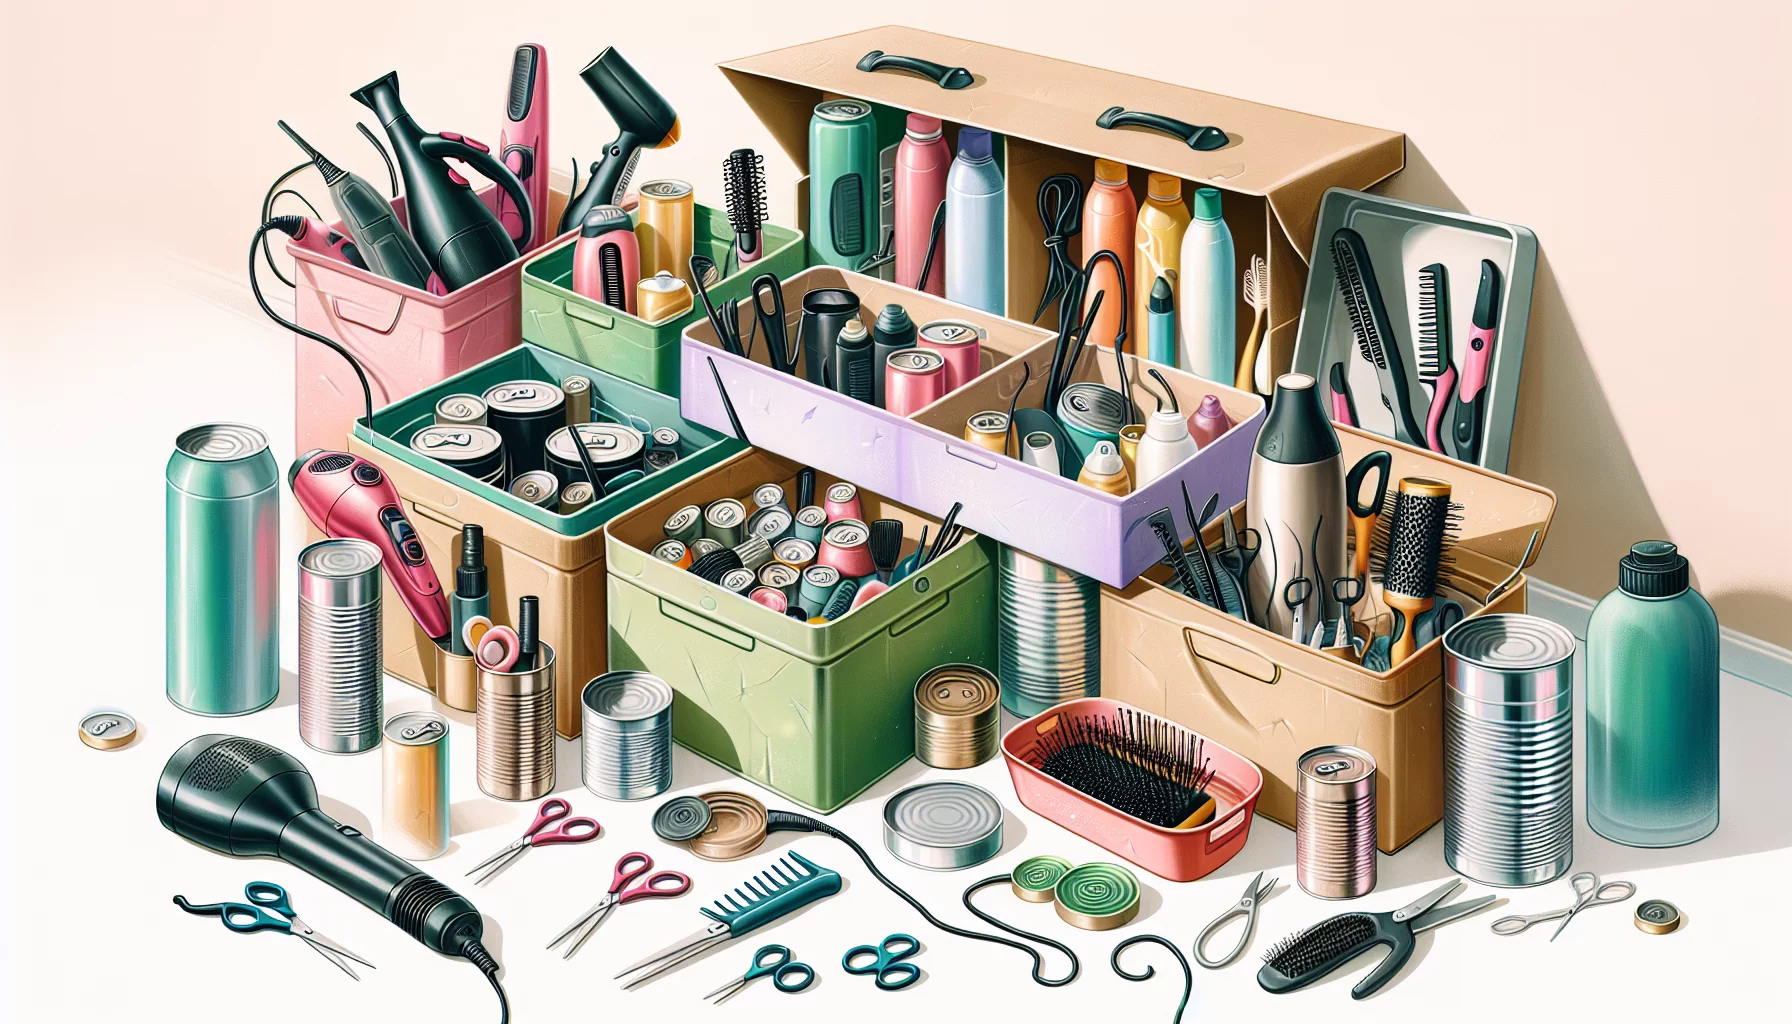 Discover an amazing Tiktok hack for storing hair tools efficiently and sustainably